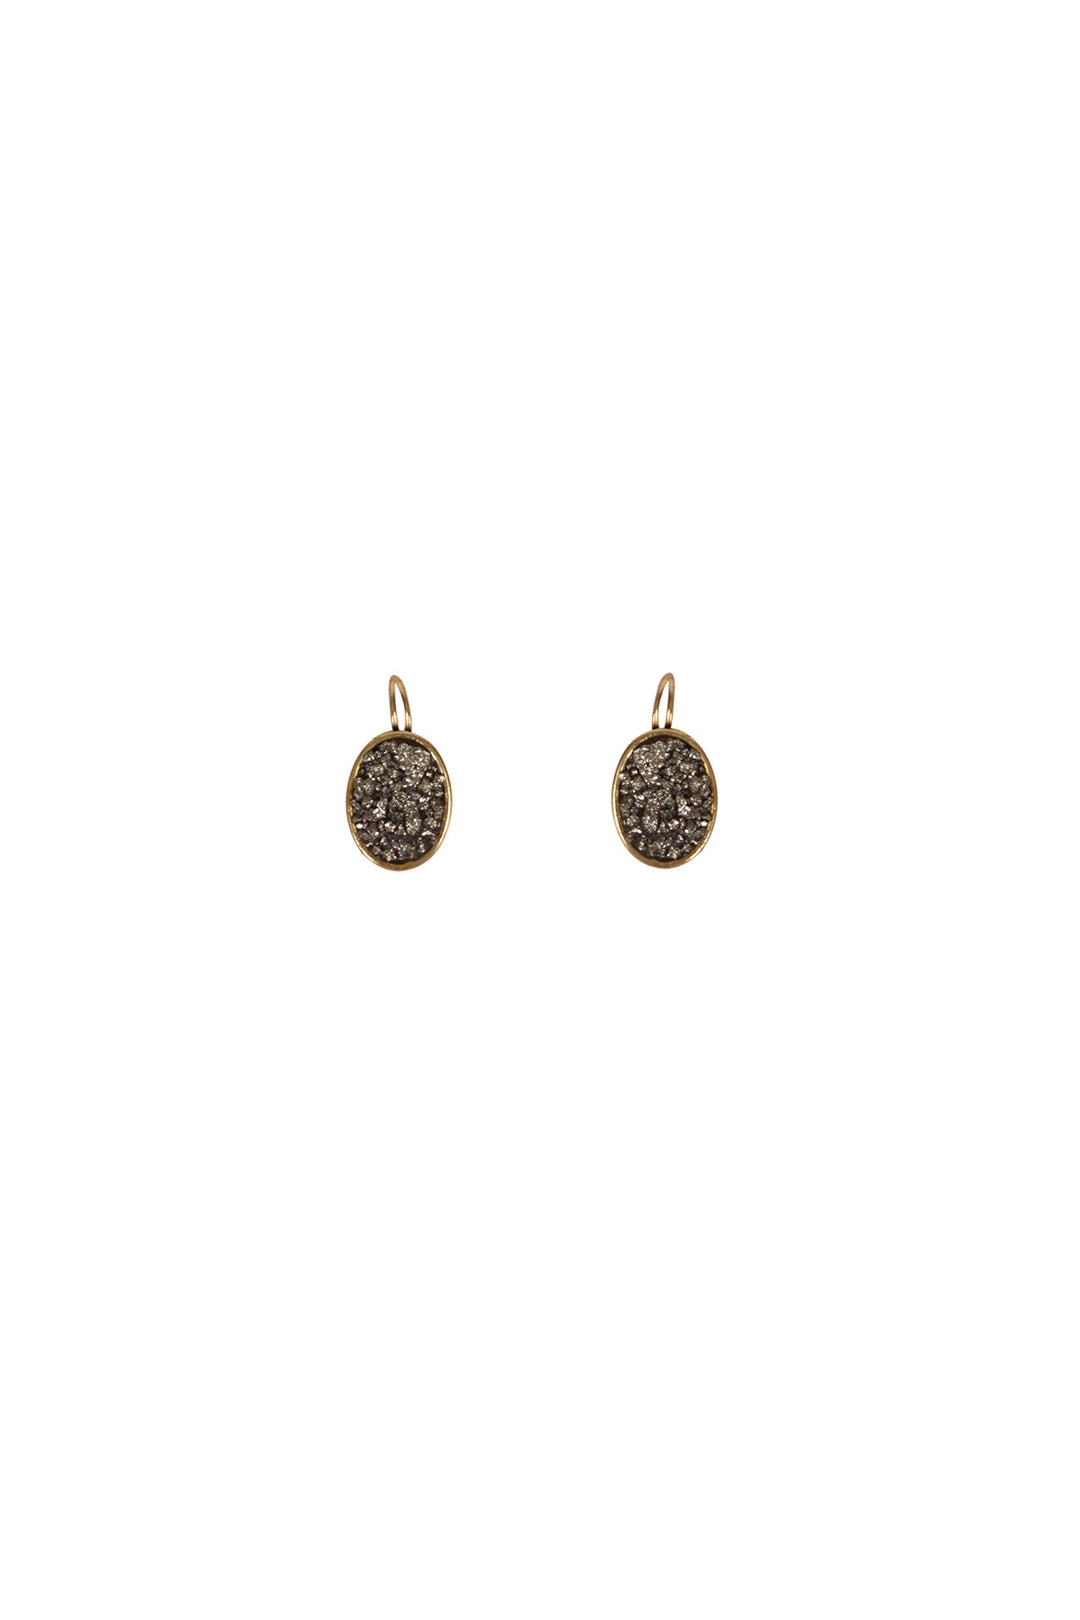 Marly Moretti Astro Earring - Gold